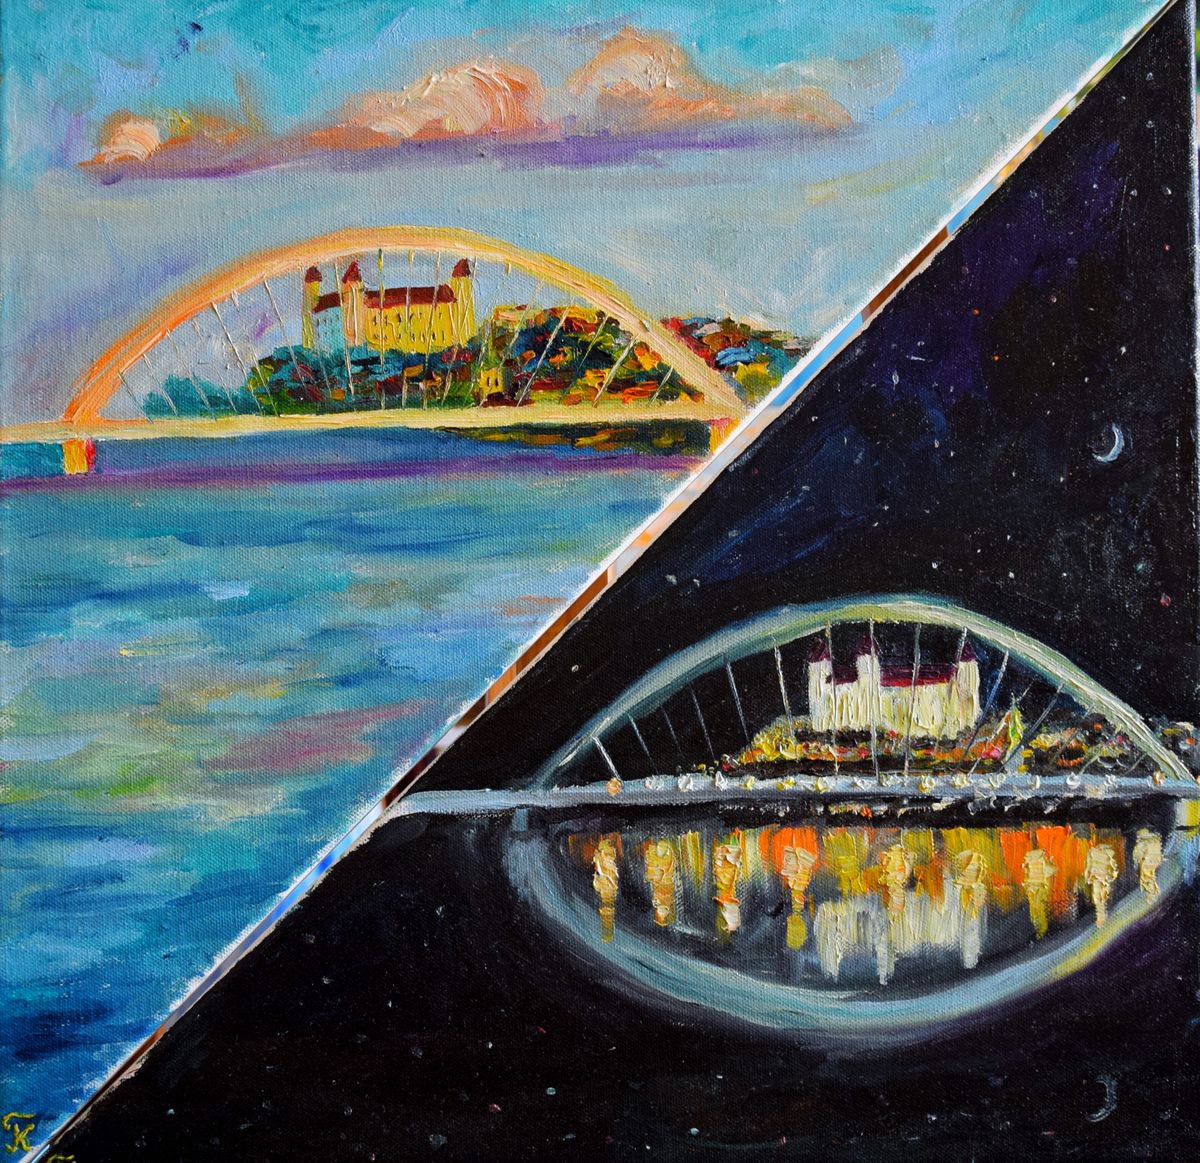 Diptych Bratislava day and night, set of 2 OIL PAINTINGS on canvas by Kate Grishakova